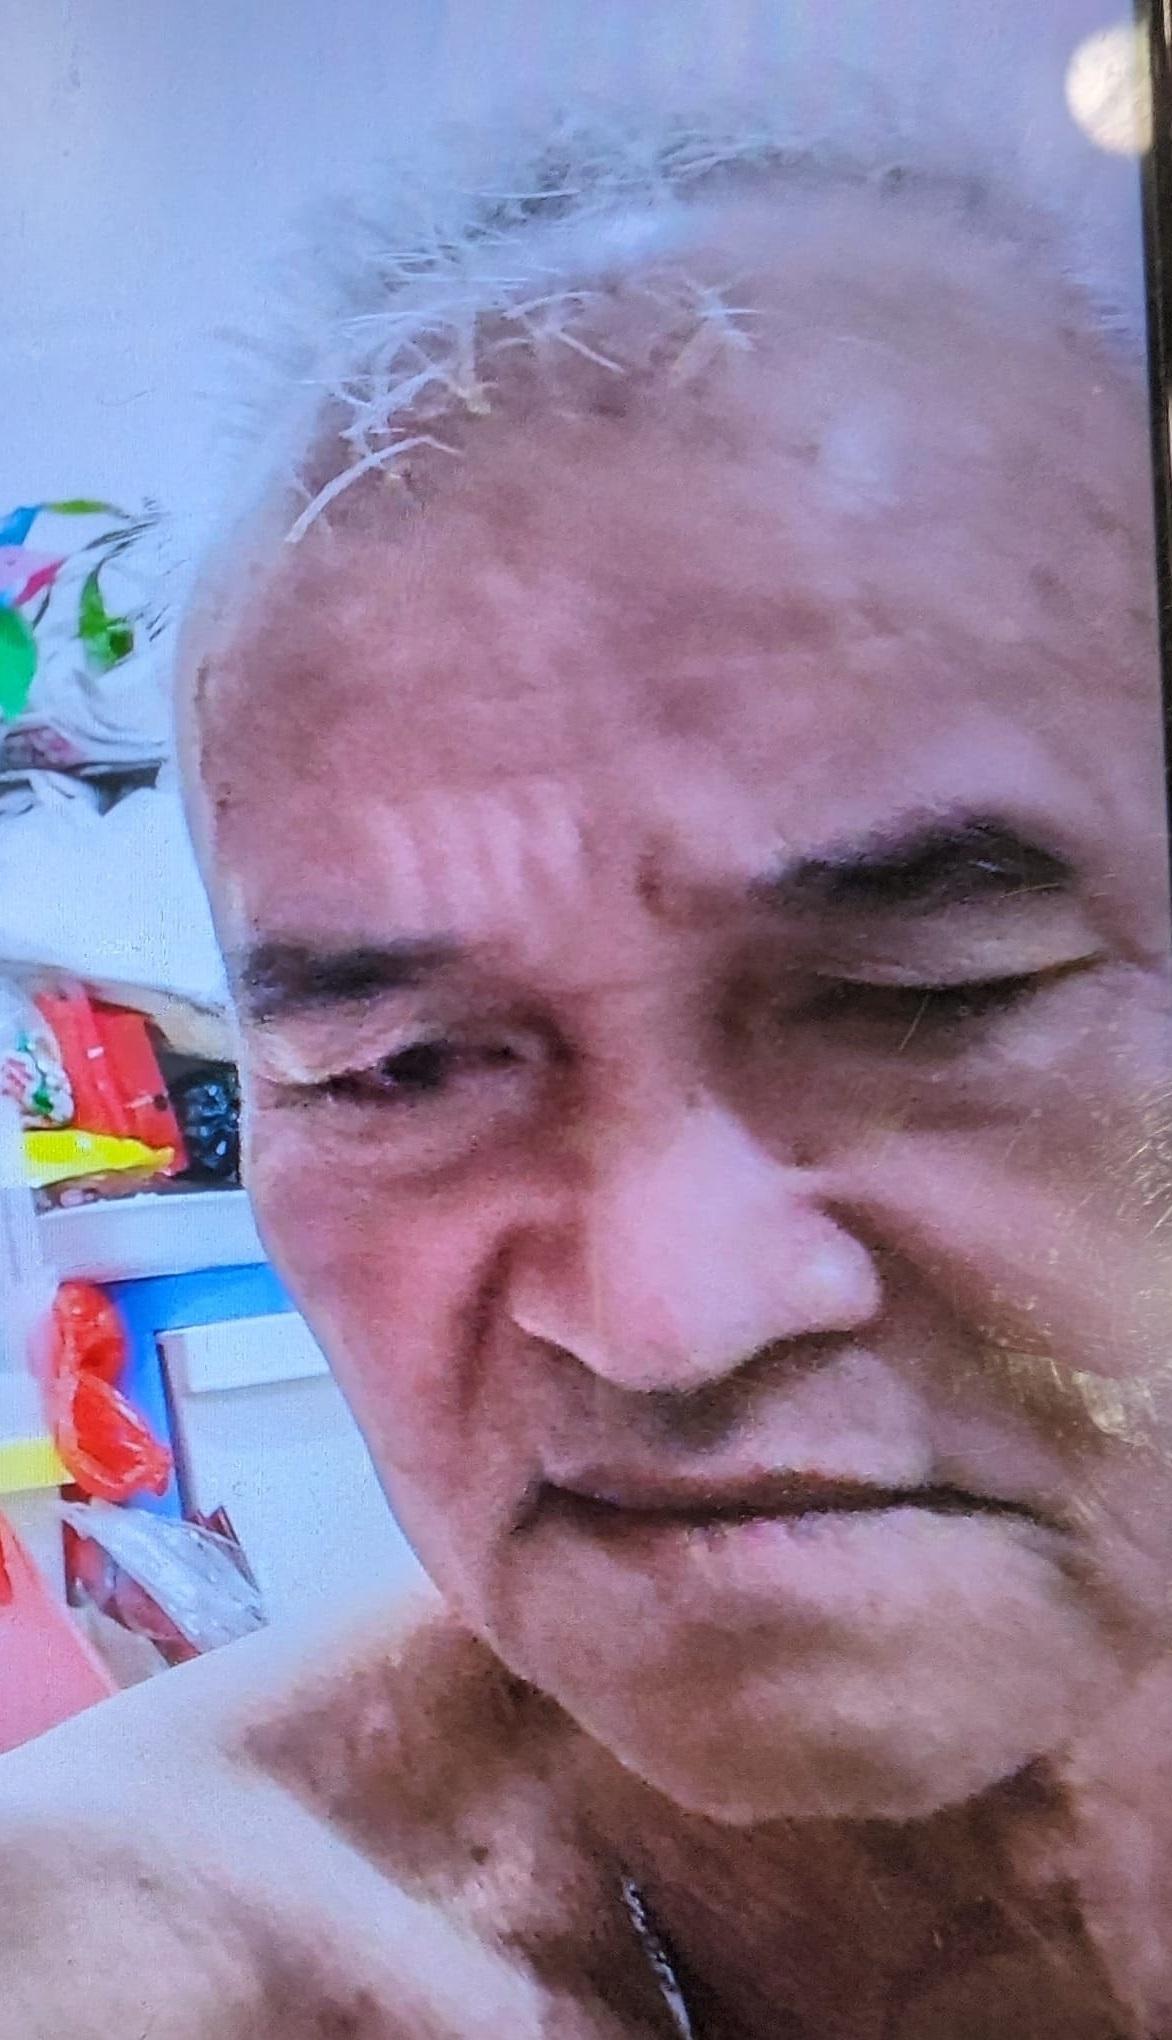 Leung Ngau-chai, aged 72, is about 1.7 metres tall, 54 kilograms in weight and of thin build. He has a square face with yellow complexion and short white hair. He was last seen wearing a dark colour short-sleeved shirt, blue shorts, dark colour shoes and carrying a black rucksack.